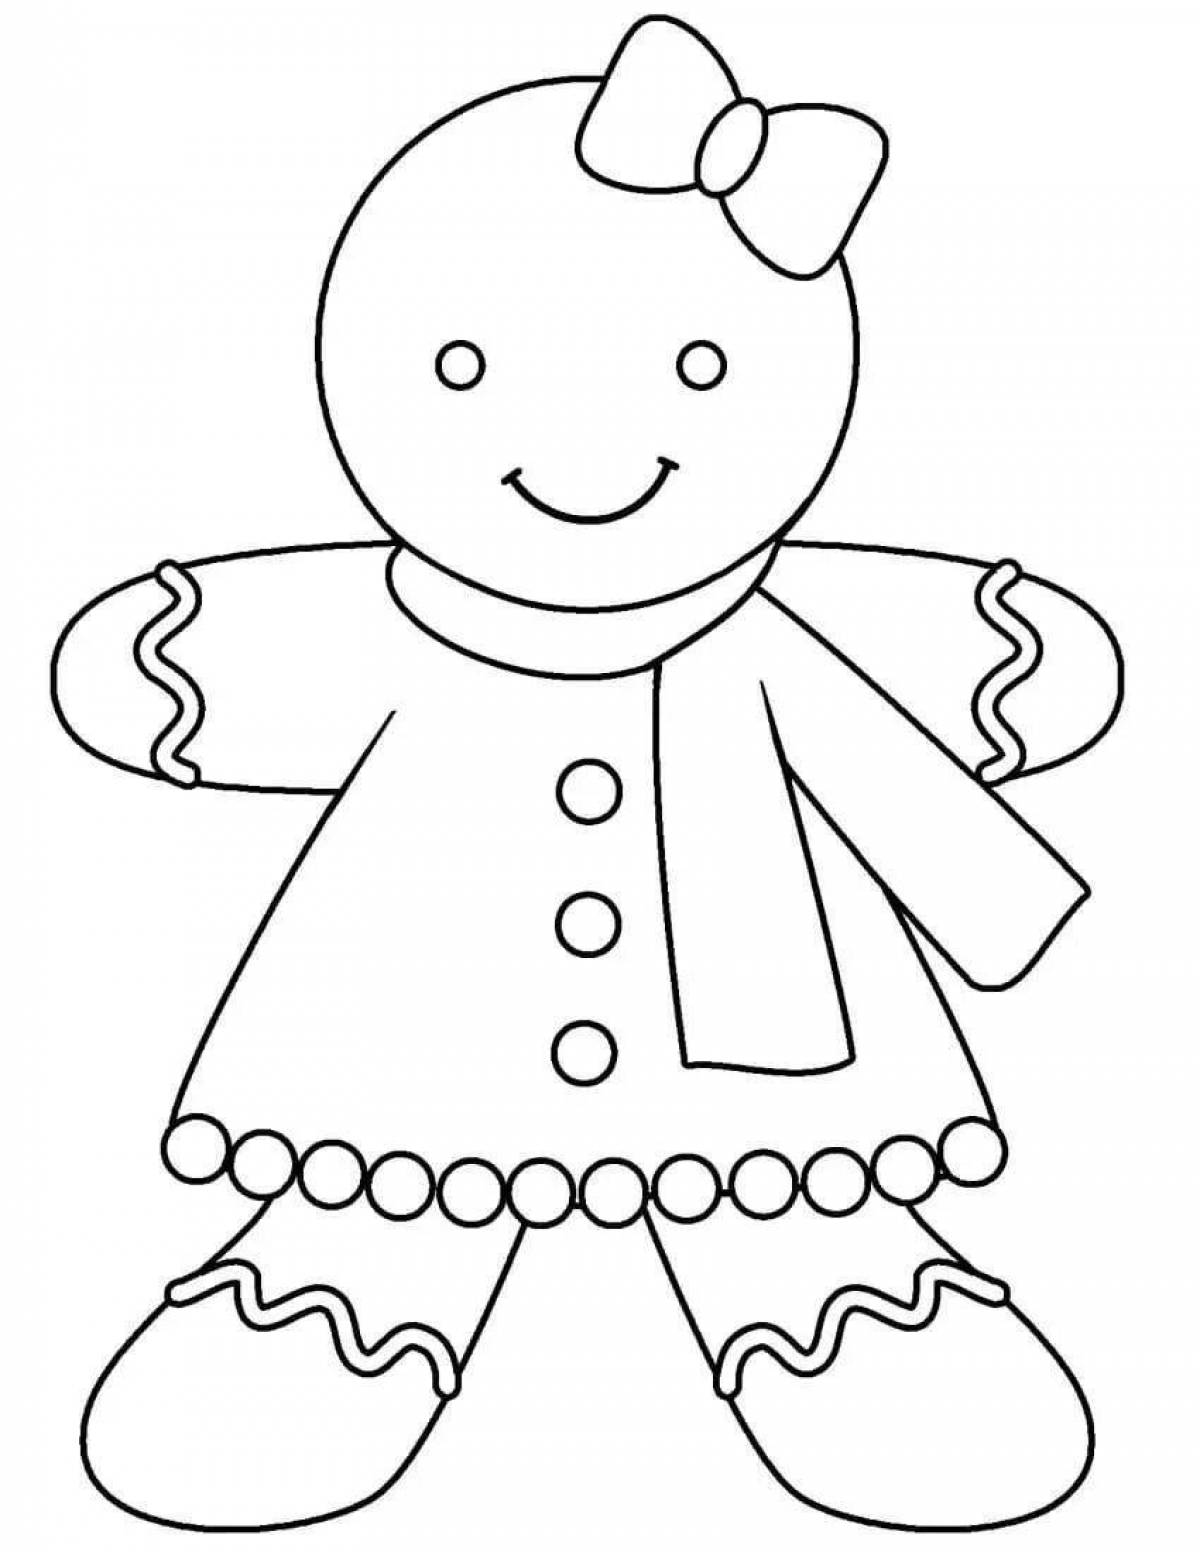 Coloring quirky gingerbread man